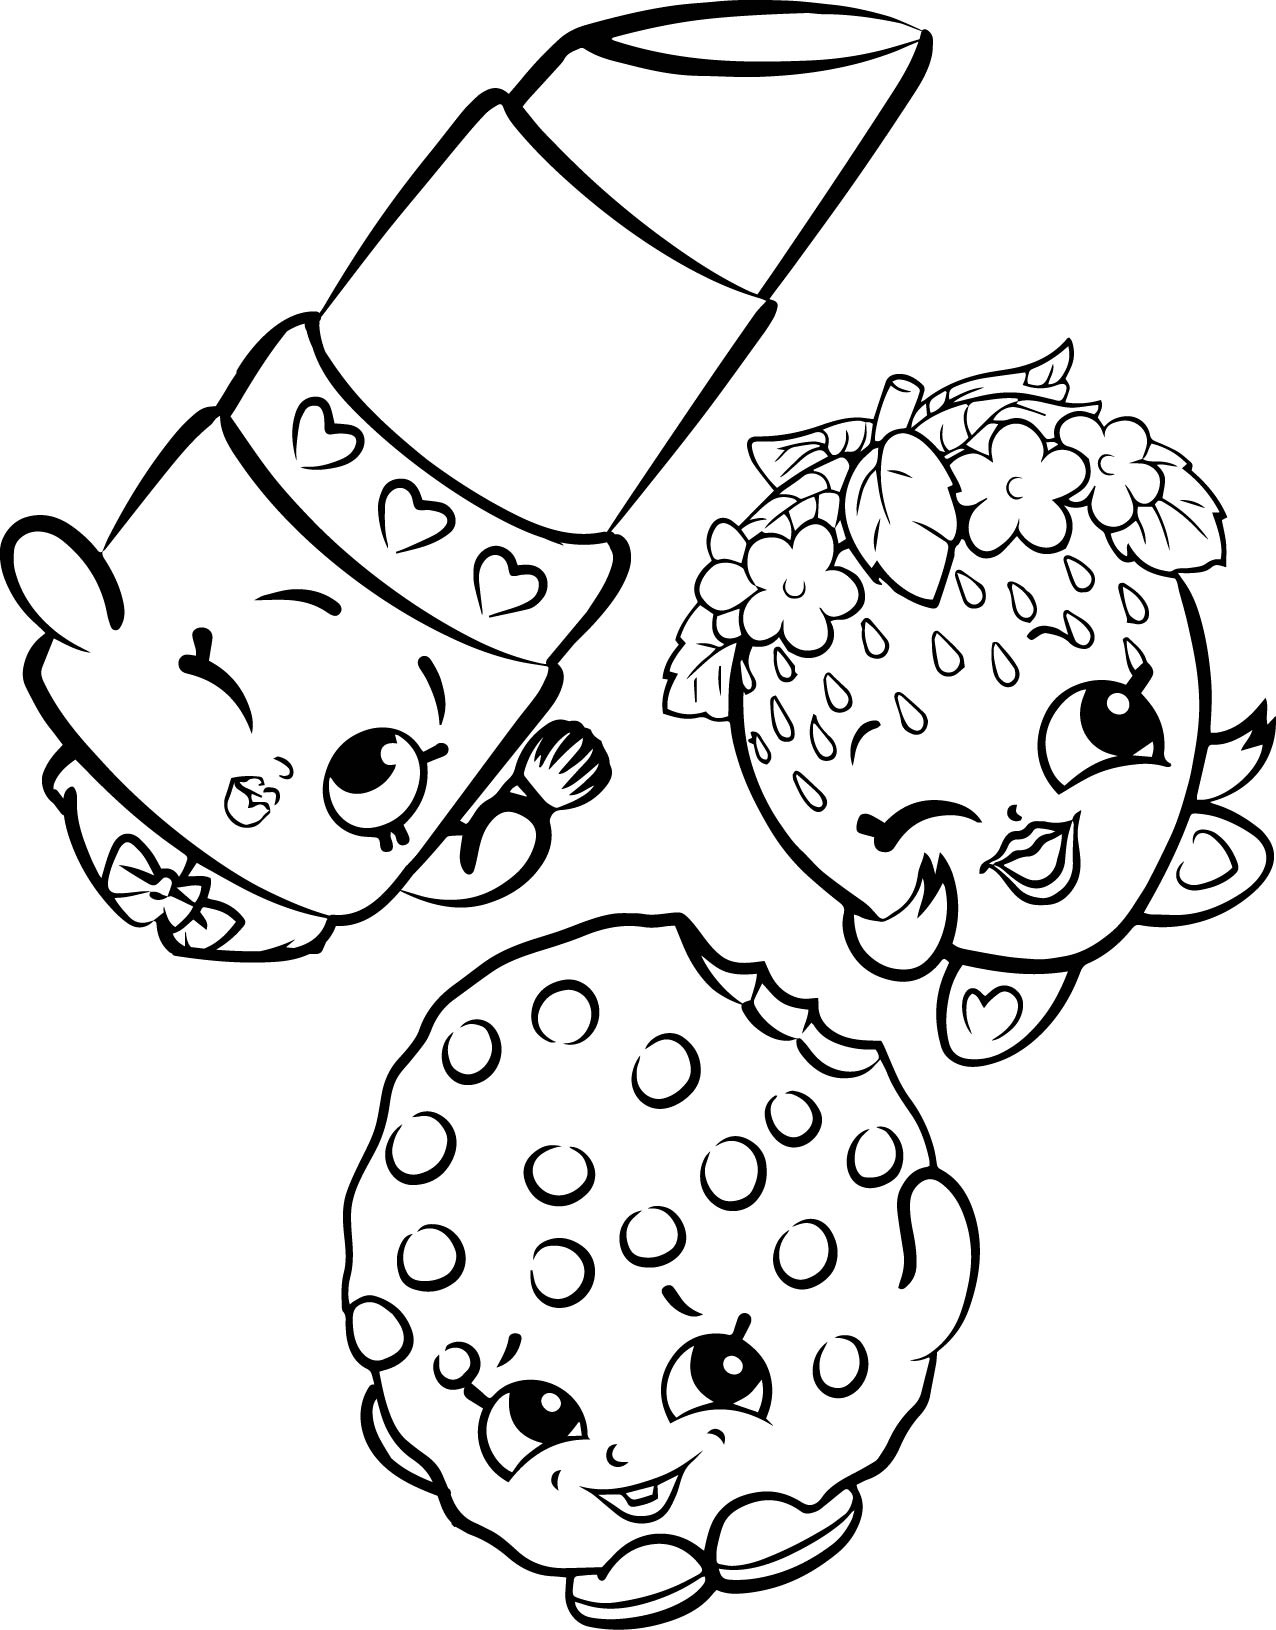 630 Simple Shopkins Lippy Lips Coloring Pages for Kindergarten